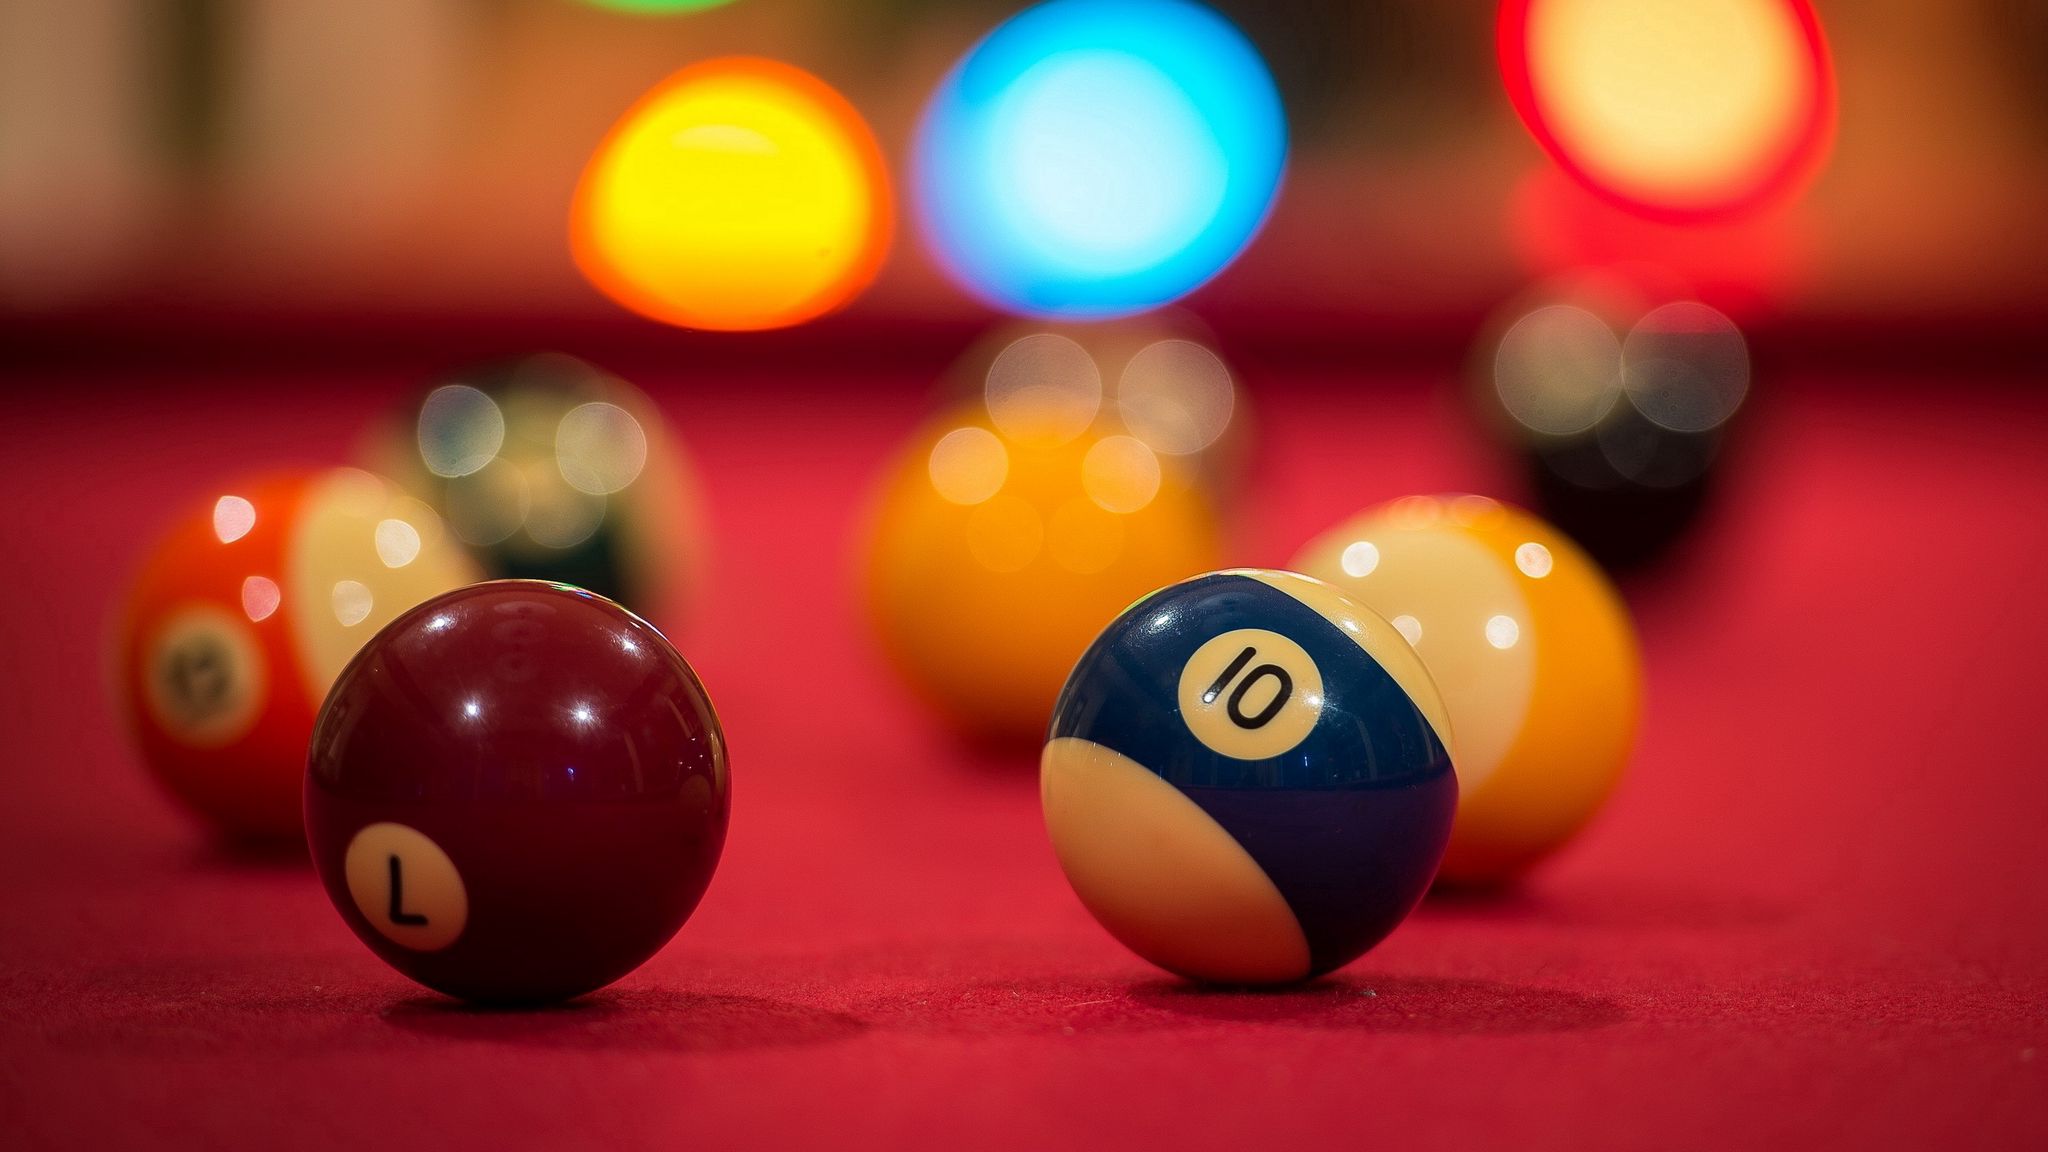 Download wallpaper 2048x1152 billiards, table, colorful, game ultrawide monitor HD background